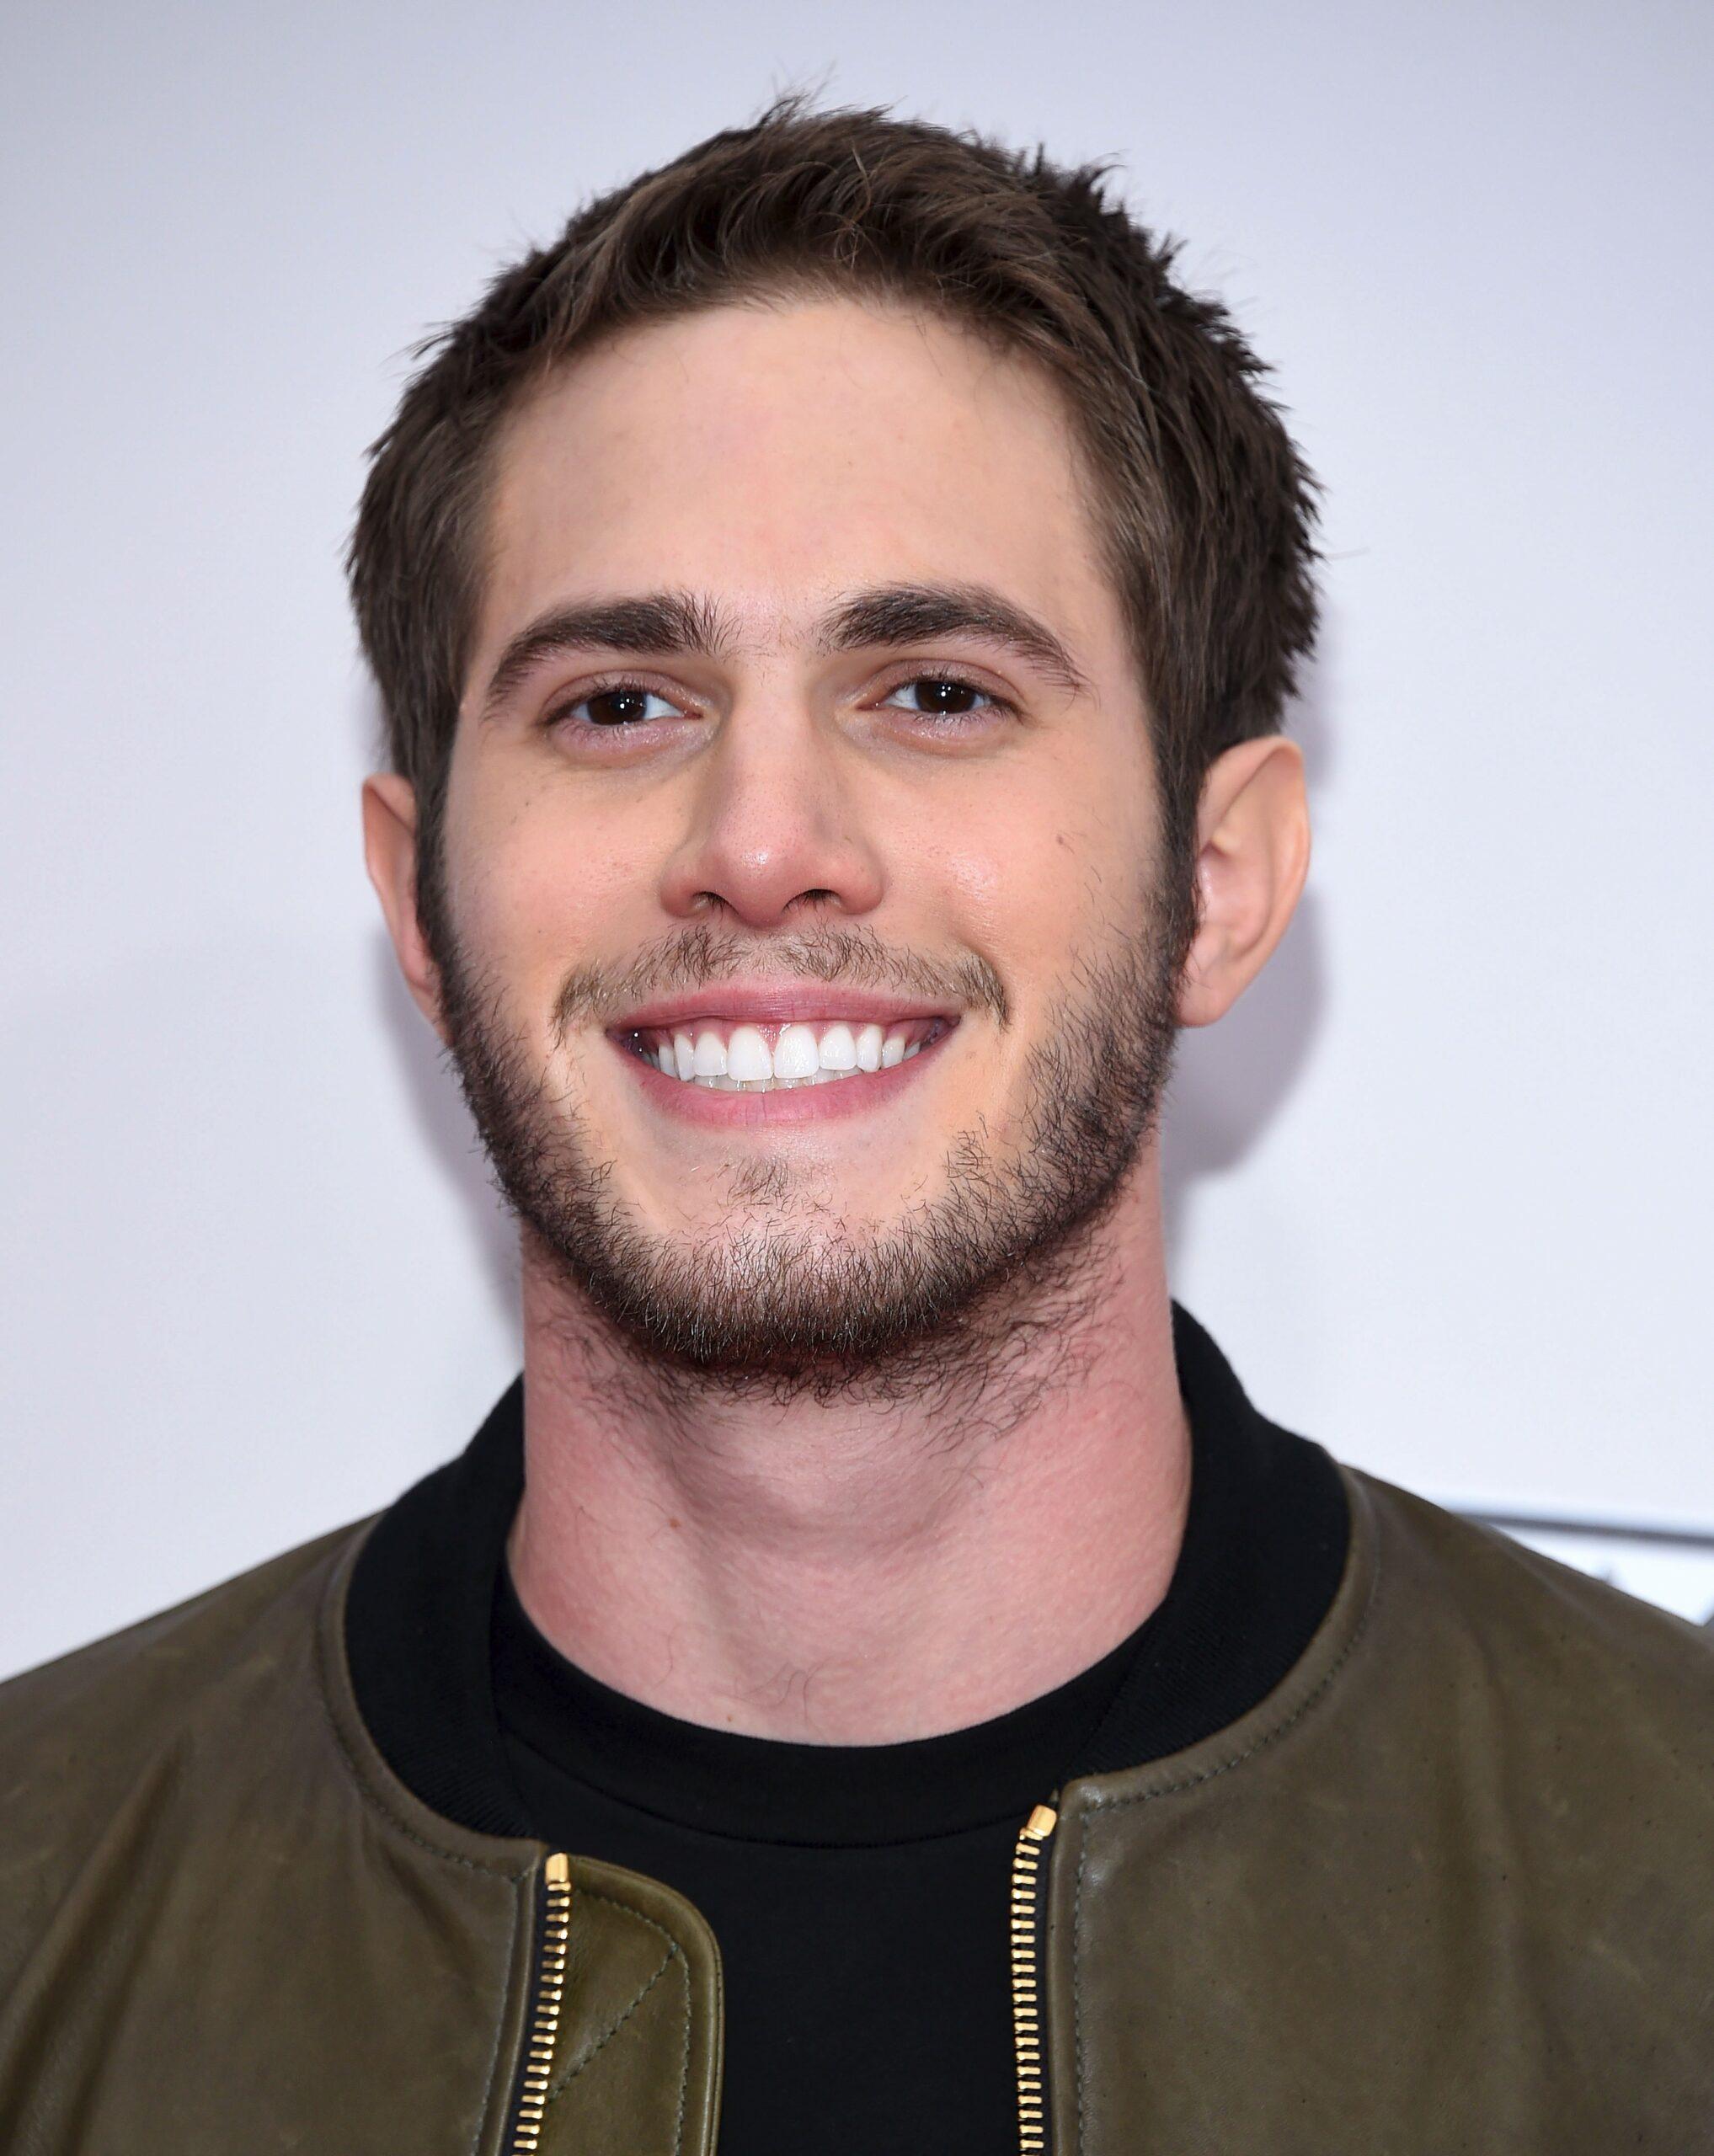 Stars seen arriving at the American Music Awards 2016 held at the Microsoft Theatre in Los Angeles, California. 20 Nov 2016 Pictured: Blake Jenner.